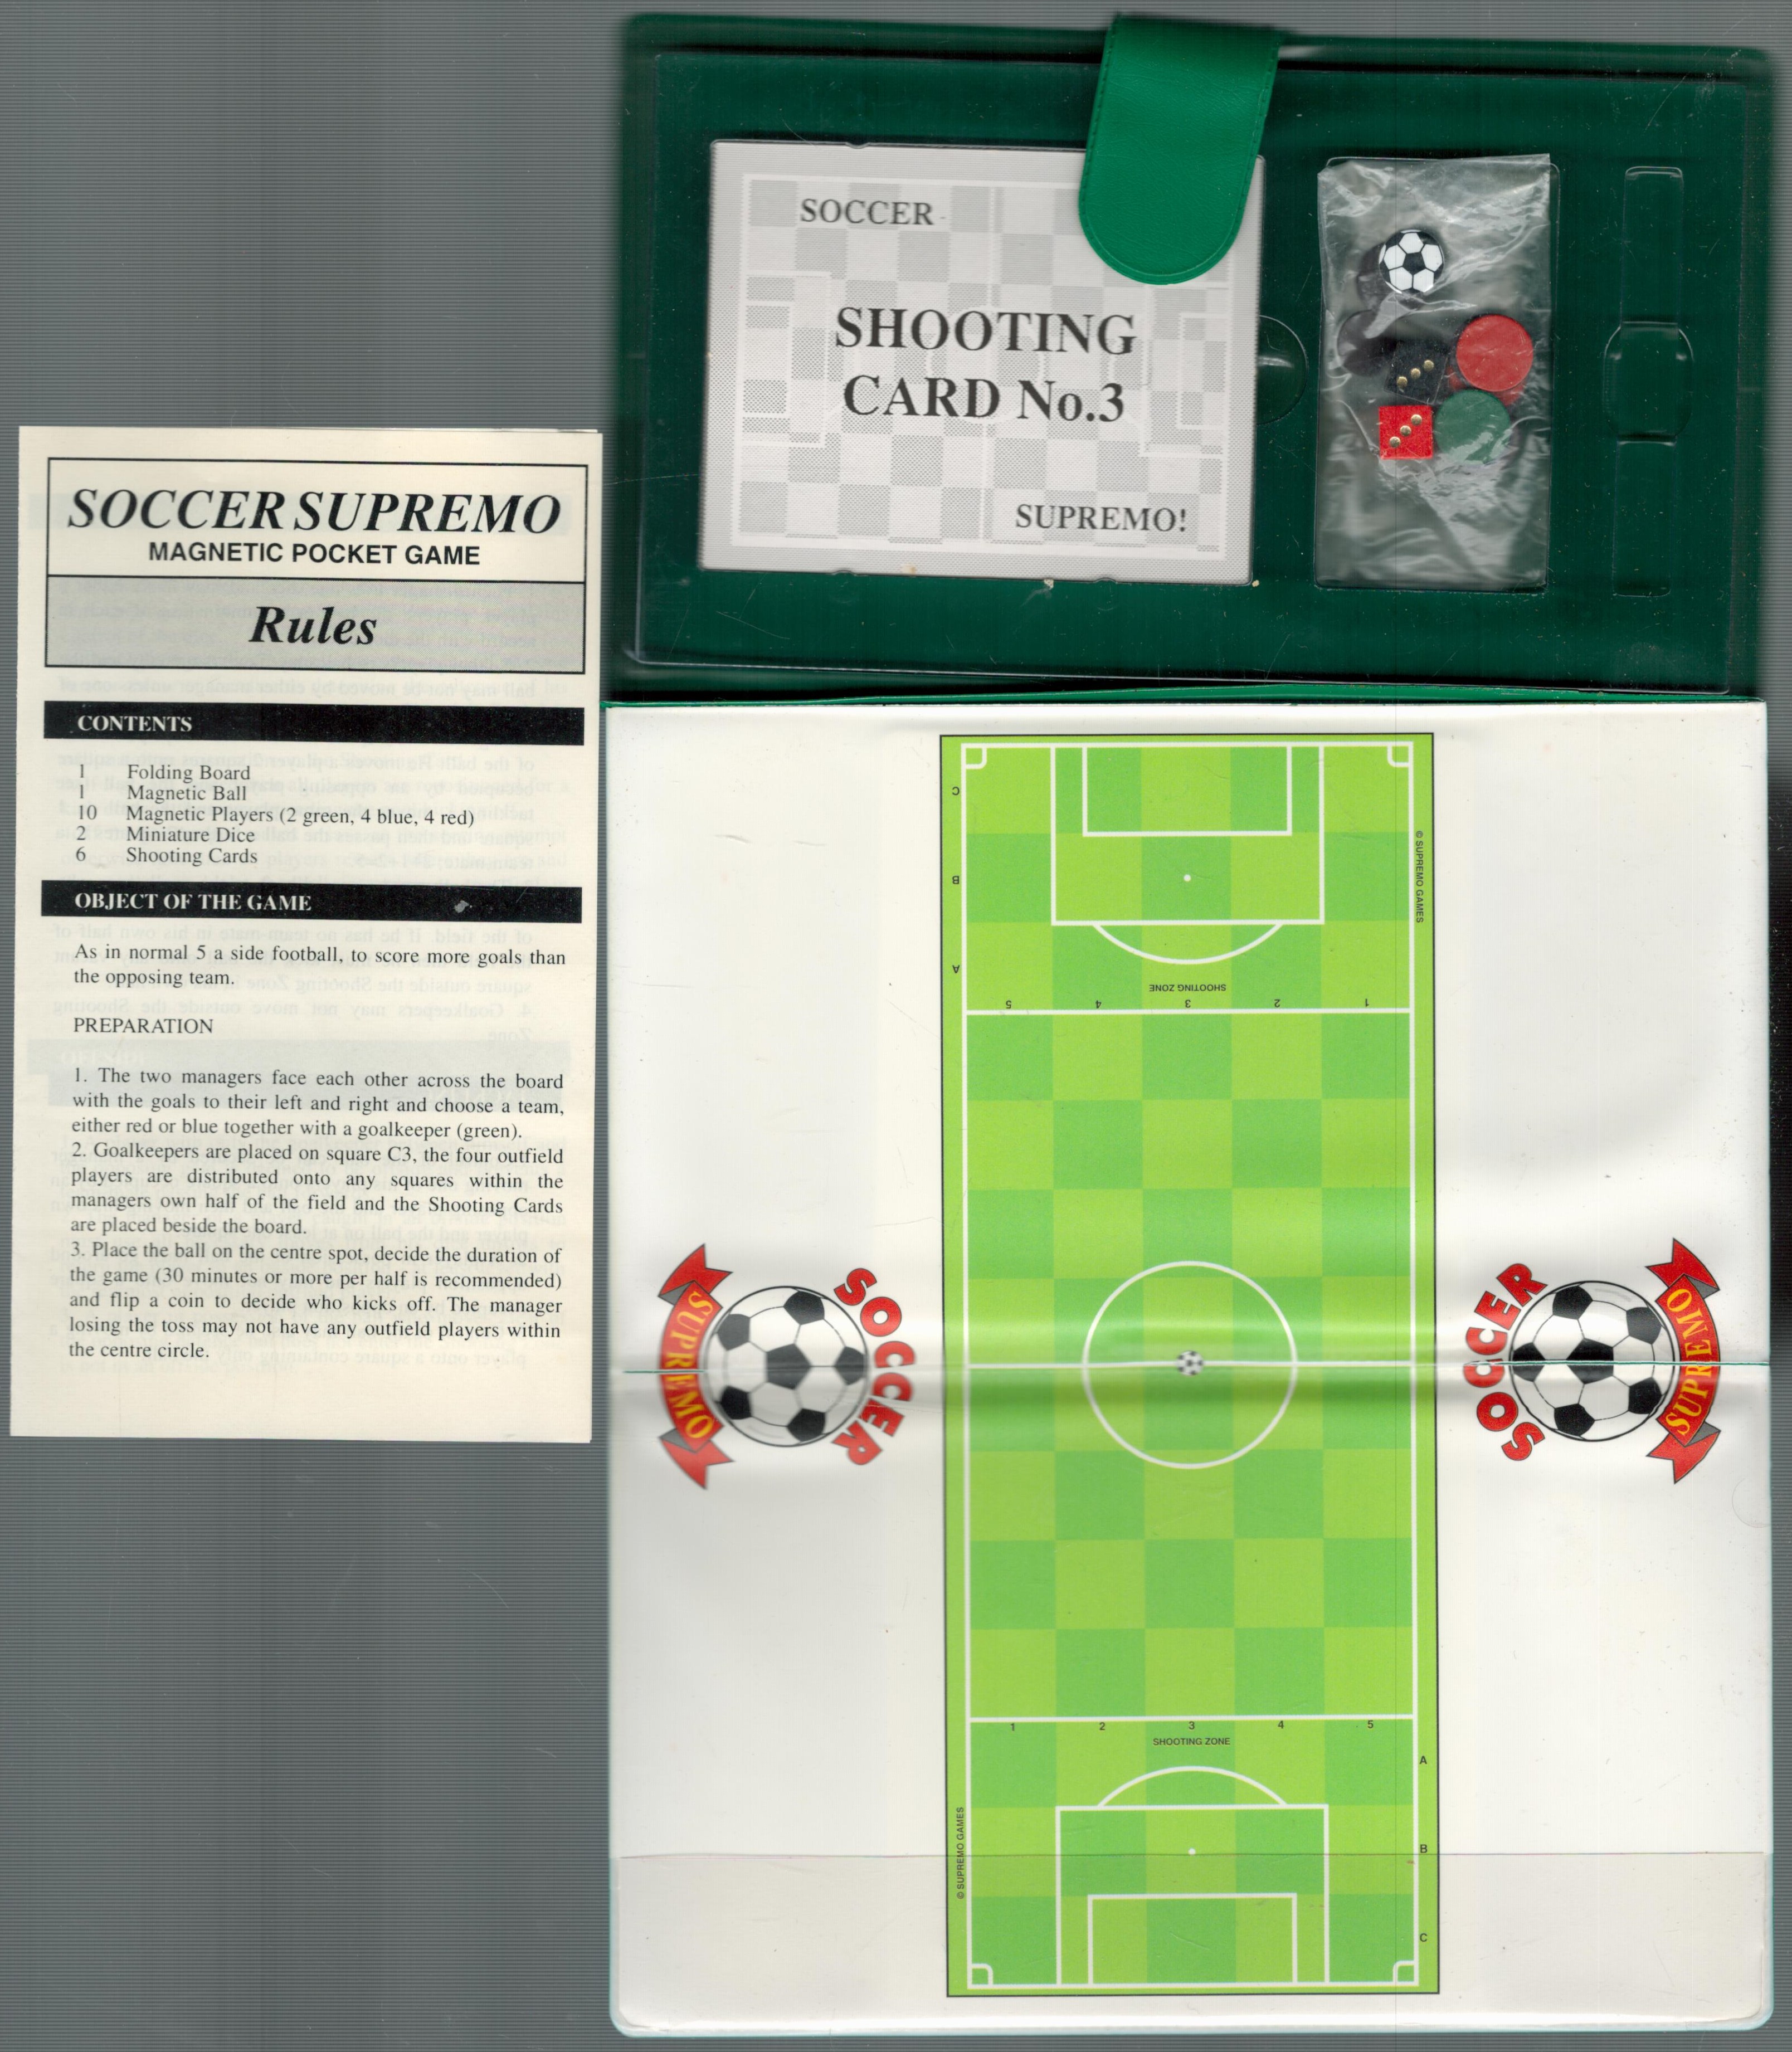 Soccer Supremo Magnetic Pocket Game by Supremo Games 1993 complete and in its traveling case which